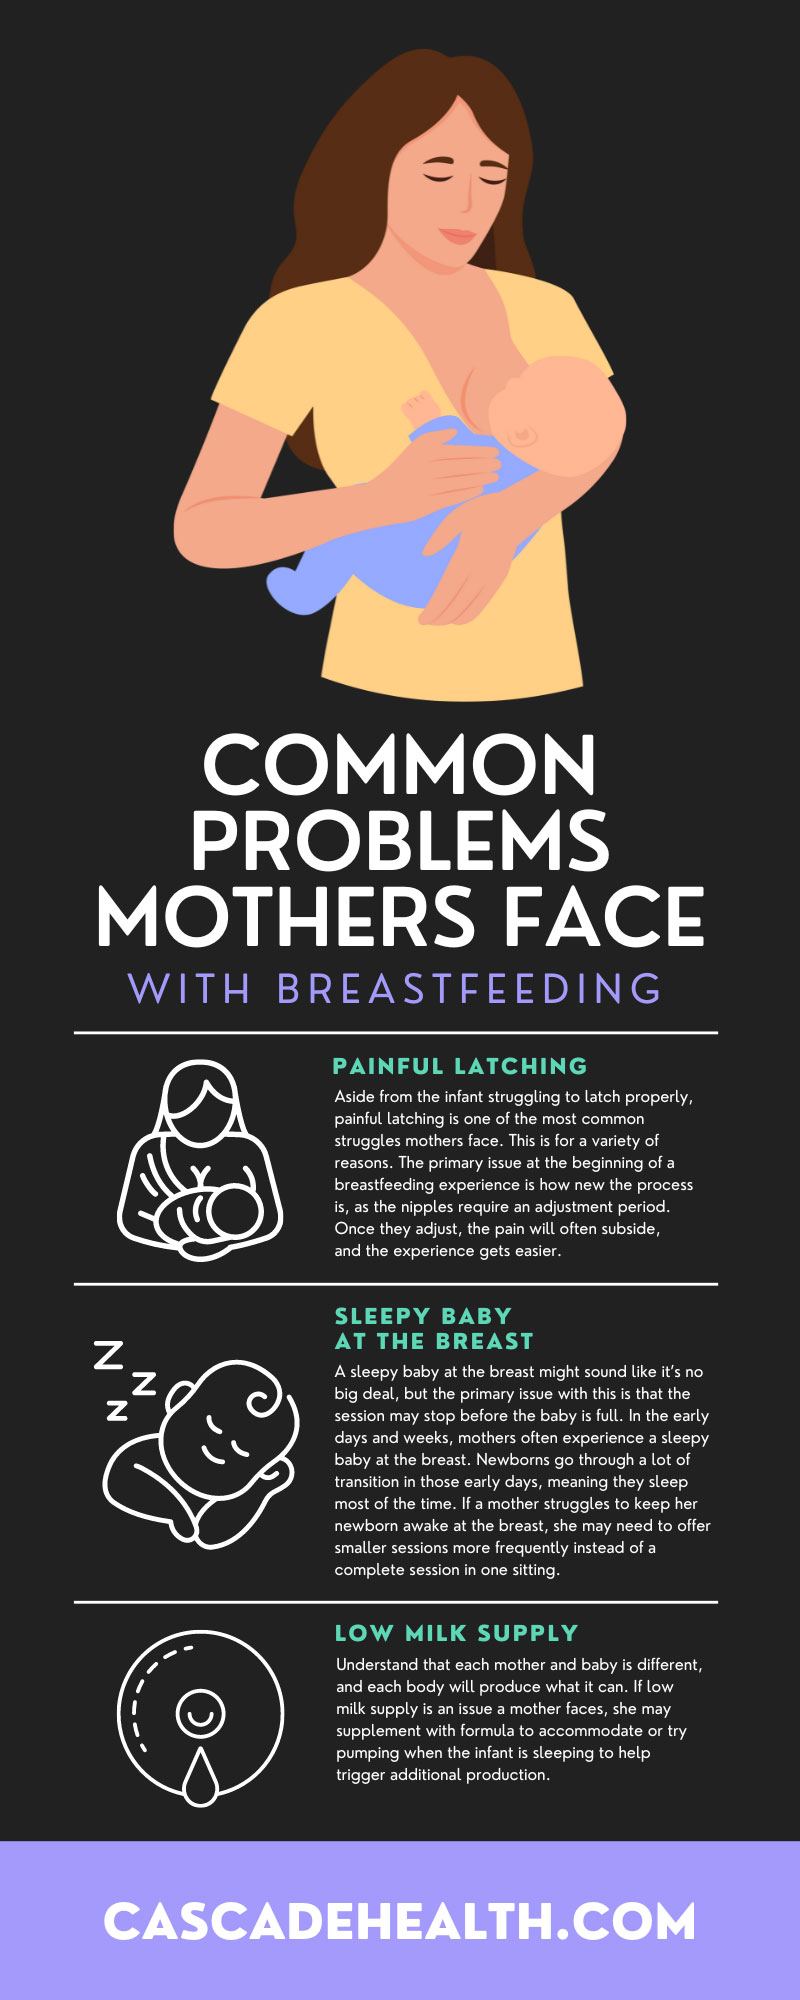 10 Common Problems Mothers Face With Breastfeeding